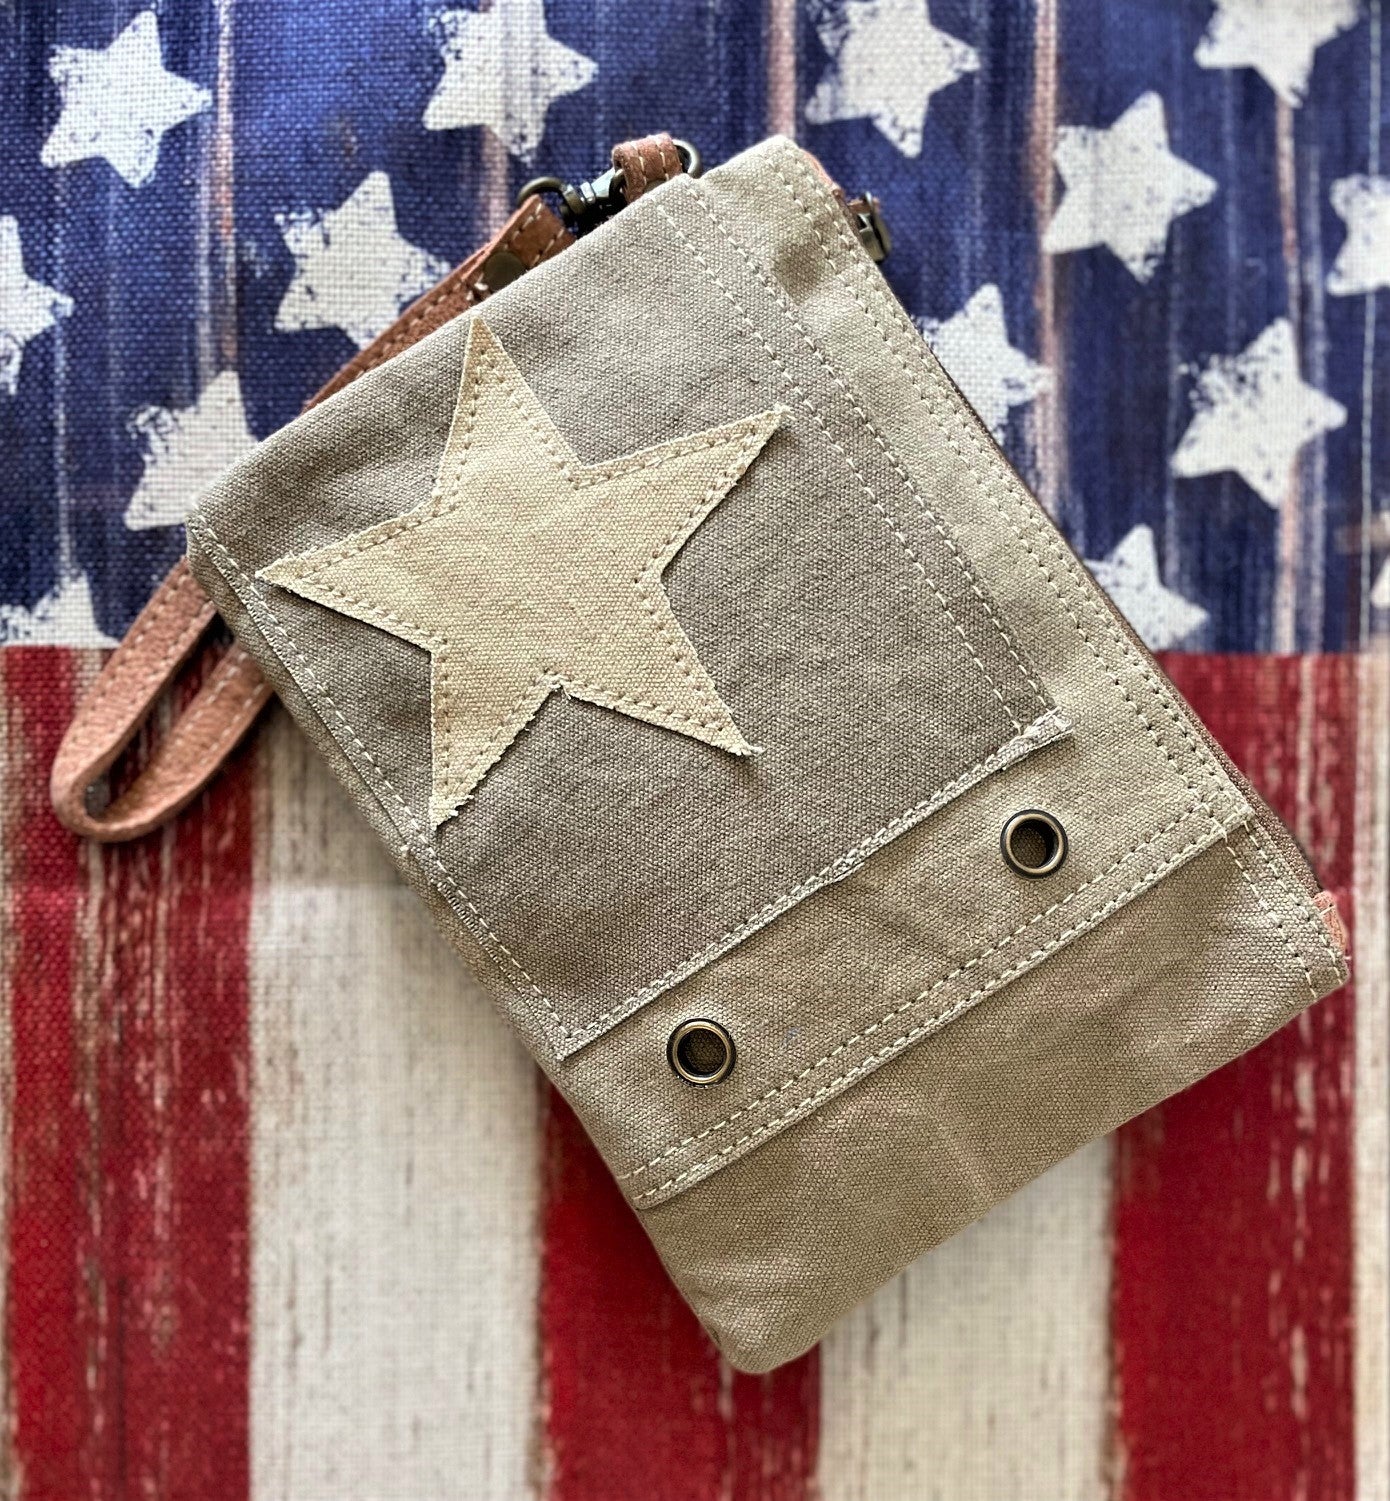 UpCycled Star Wristlet Purse - Stand Alone or Great Add to Another Bag!